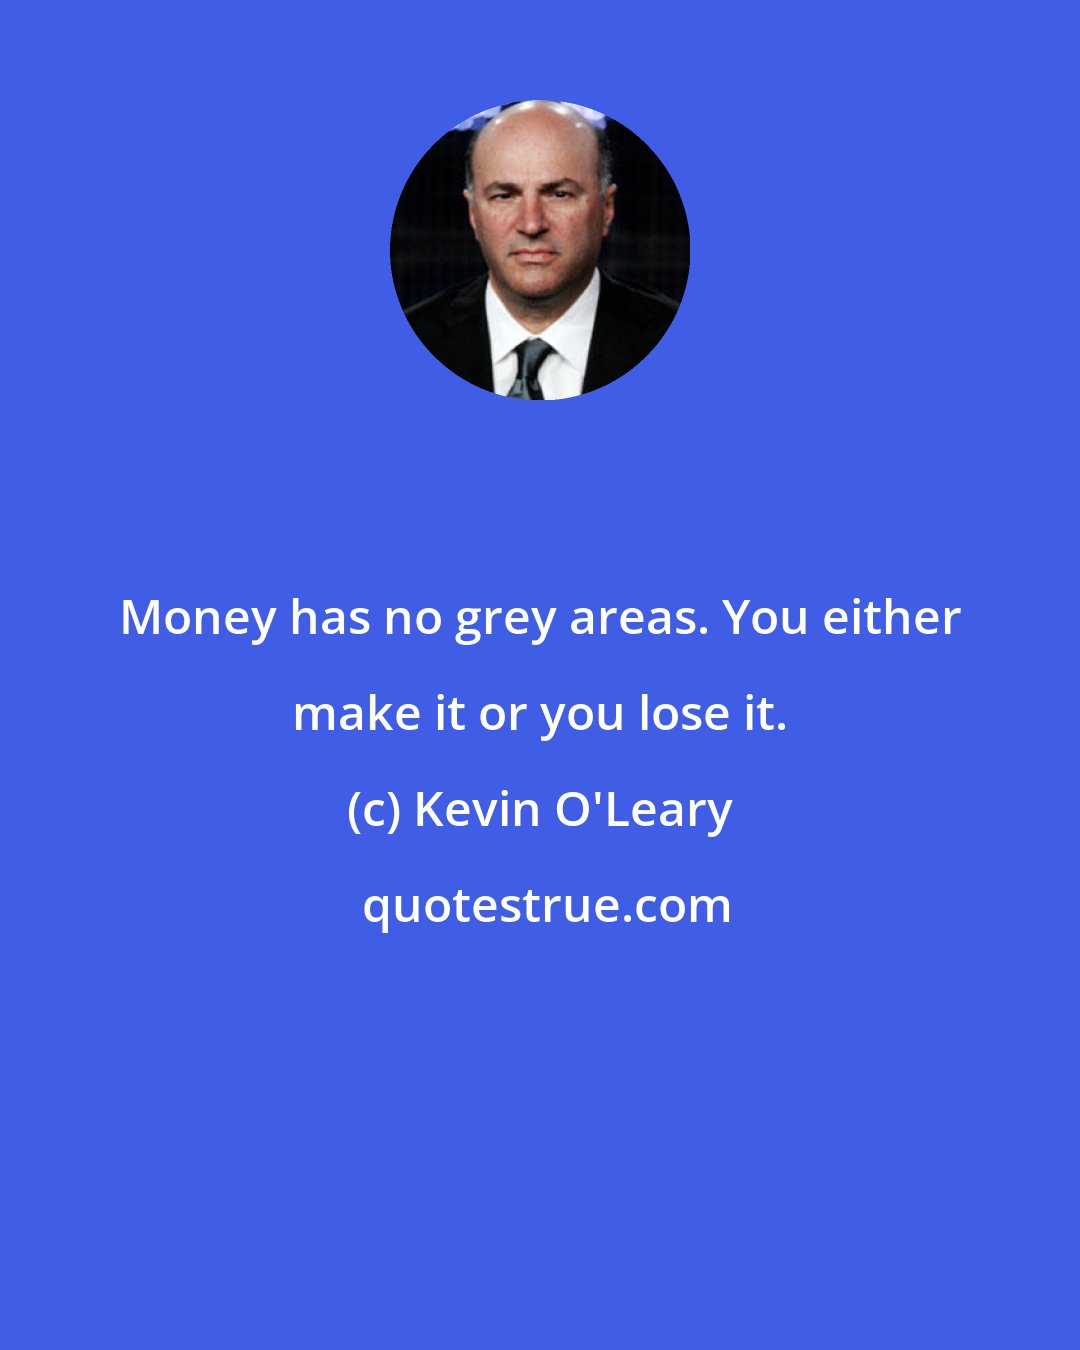 Kevin O'Leary: Money has no grey areas. You either make it or you lose it.